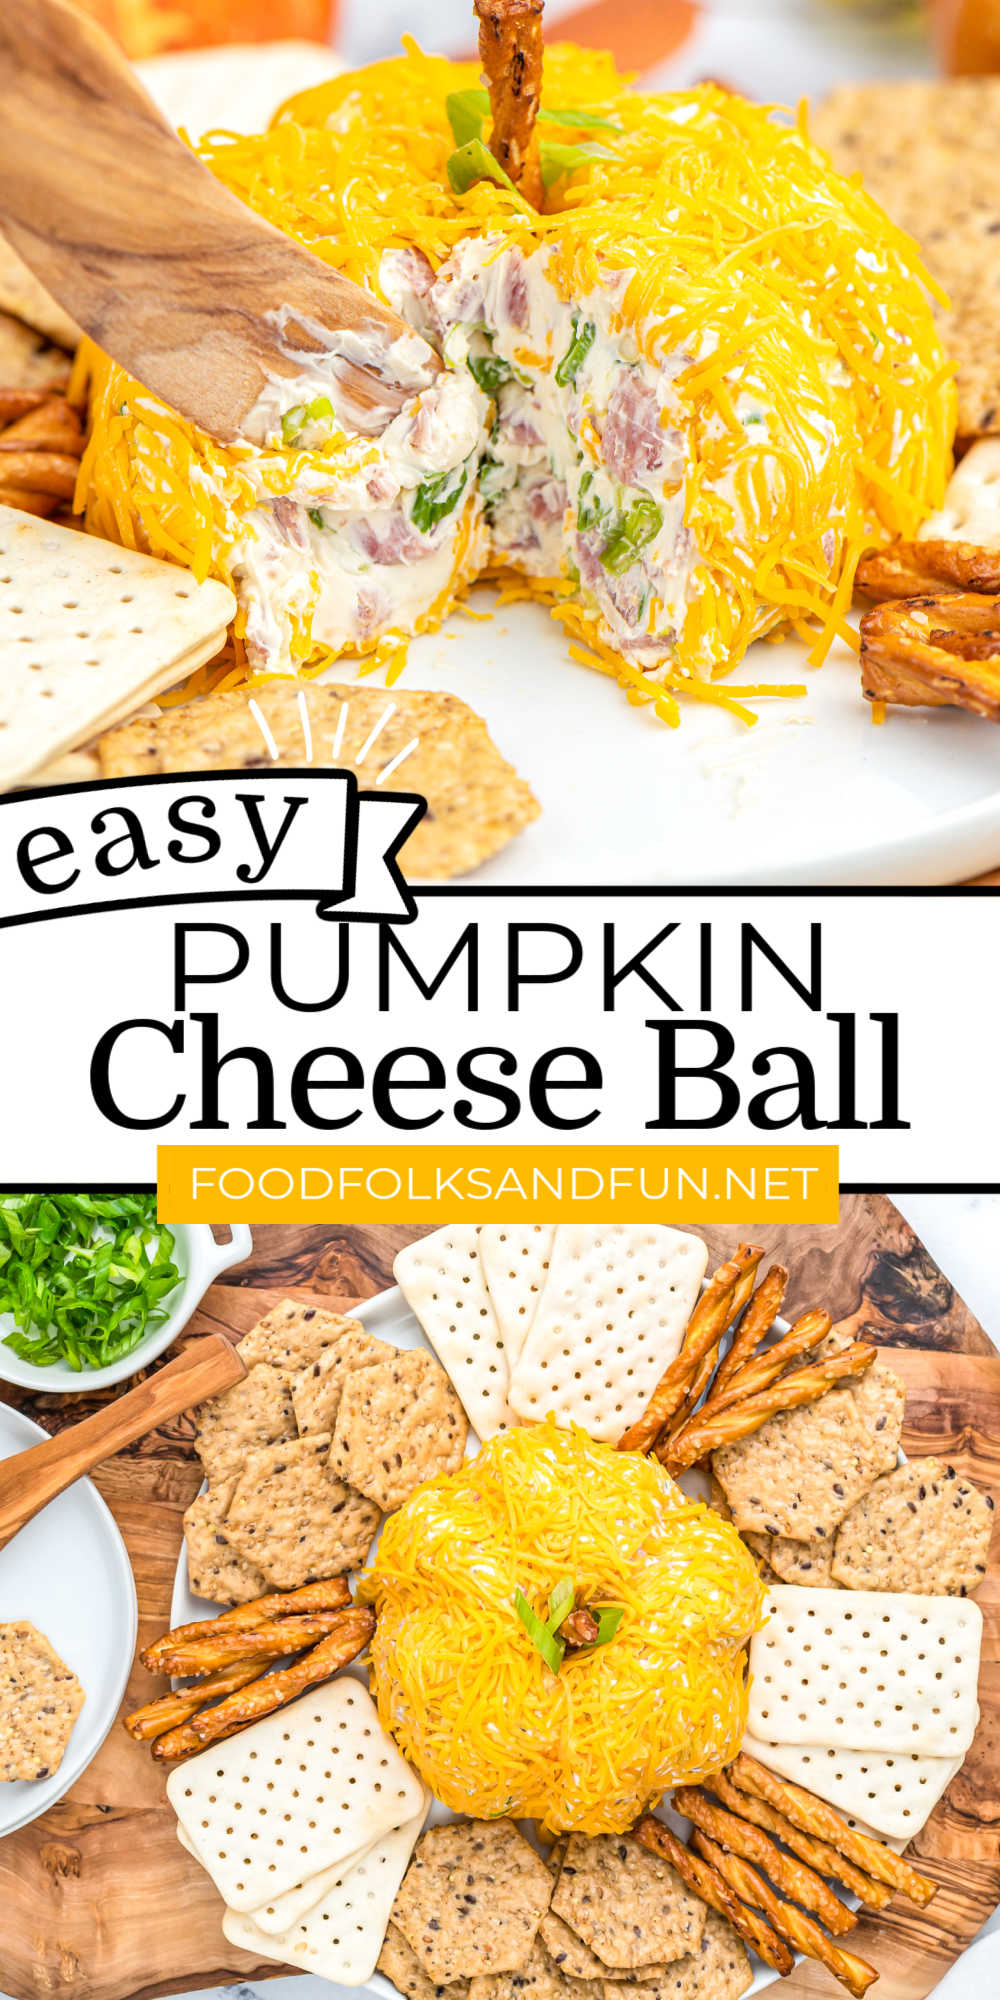 This Pumpkin Cheese Ball appetizer comes together in just a few minutes and with 5 simple ingredients! Cream cheese gets mixed with green onion, Worcestershire sauce, and finely minced salami for a smoky and salty kick. Shape it like a cute little pumpkin for an extra festive touch this fall. via @foodfolksandfun